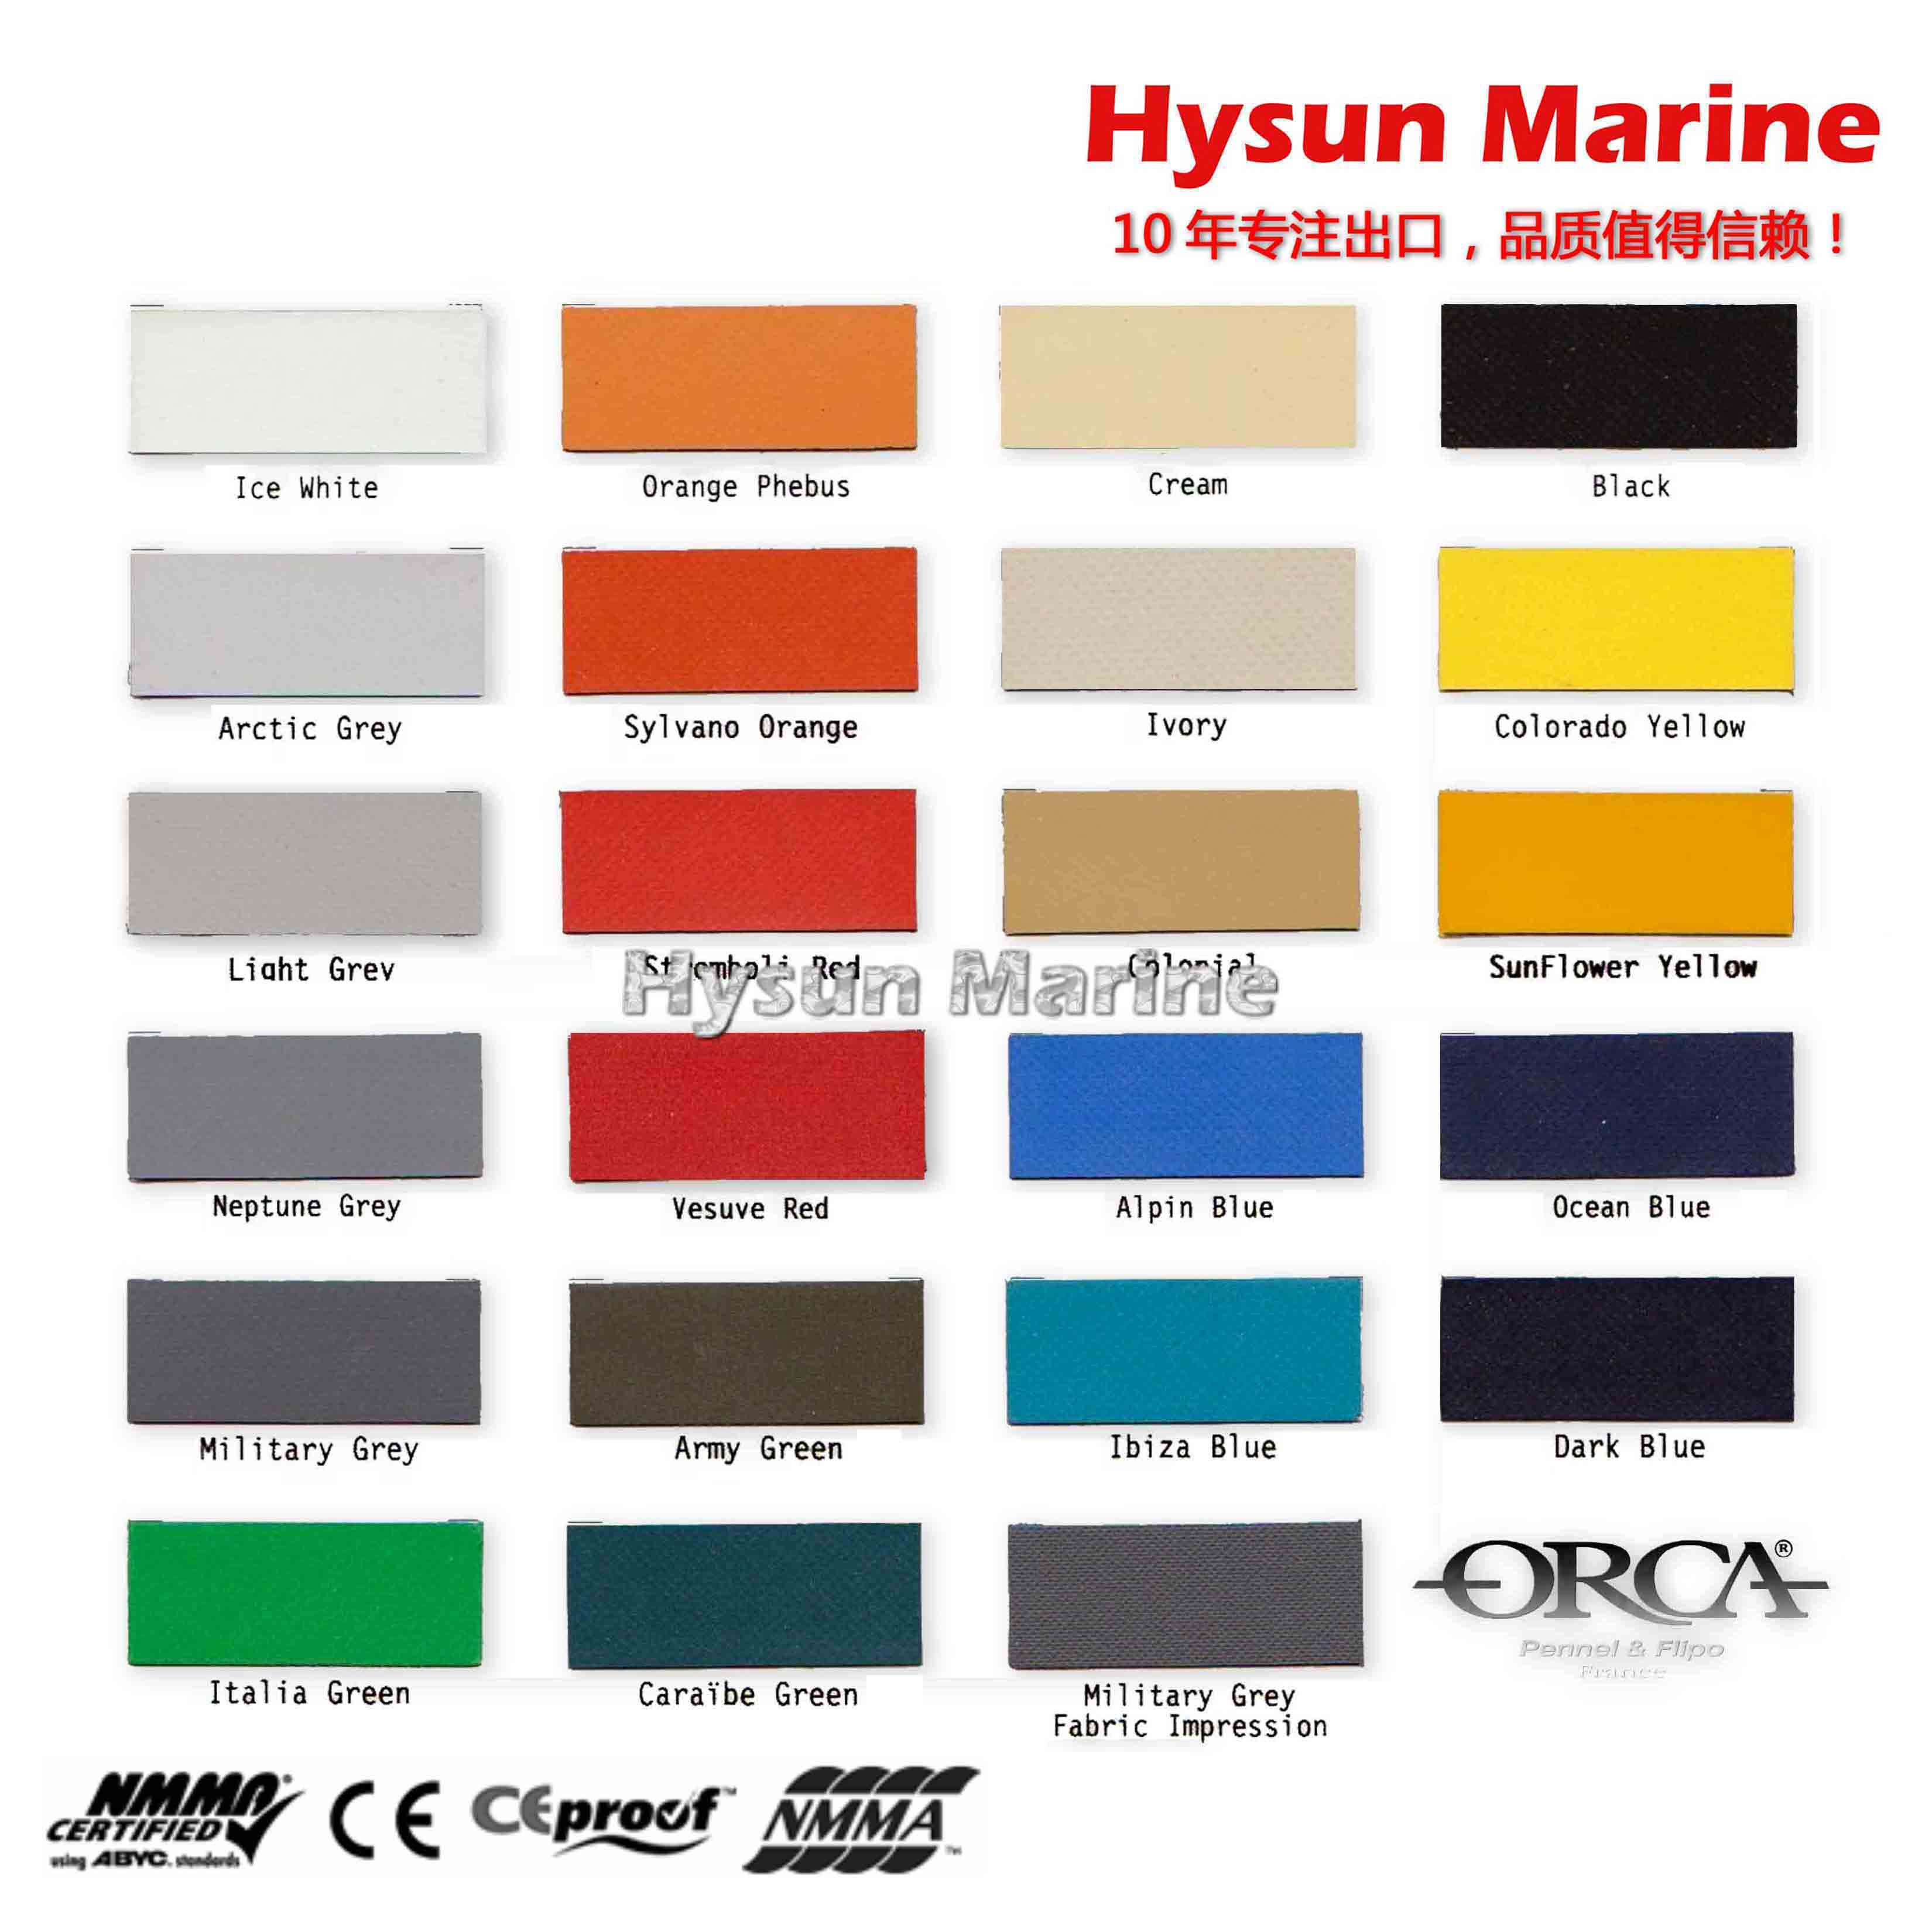 ORANGE ORCA Hypalon FABRIC Inflatable Boat Material Repair Dinghy 61 x 122 cm 